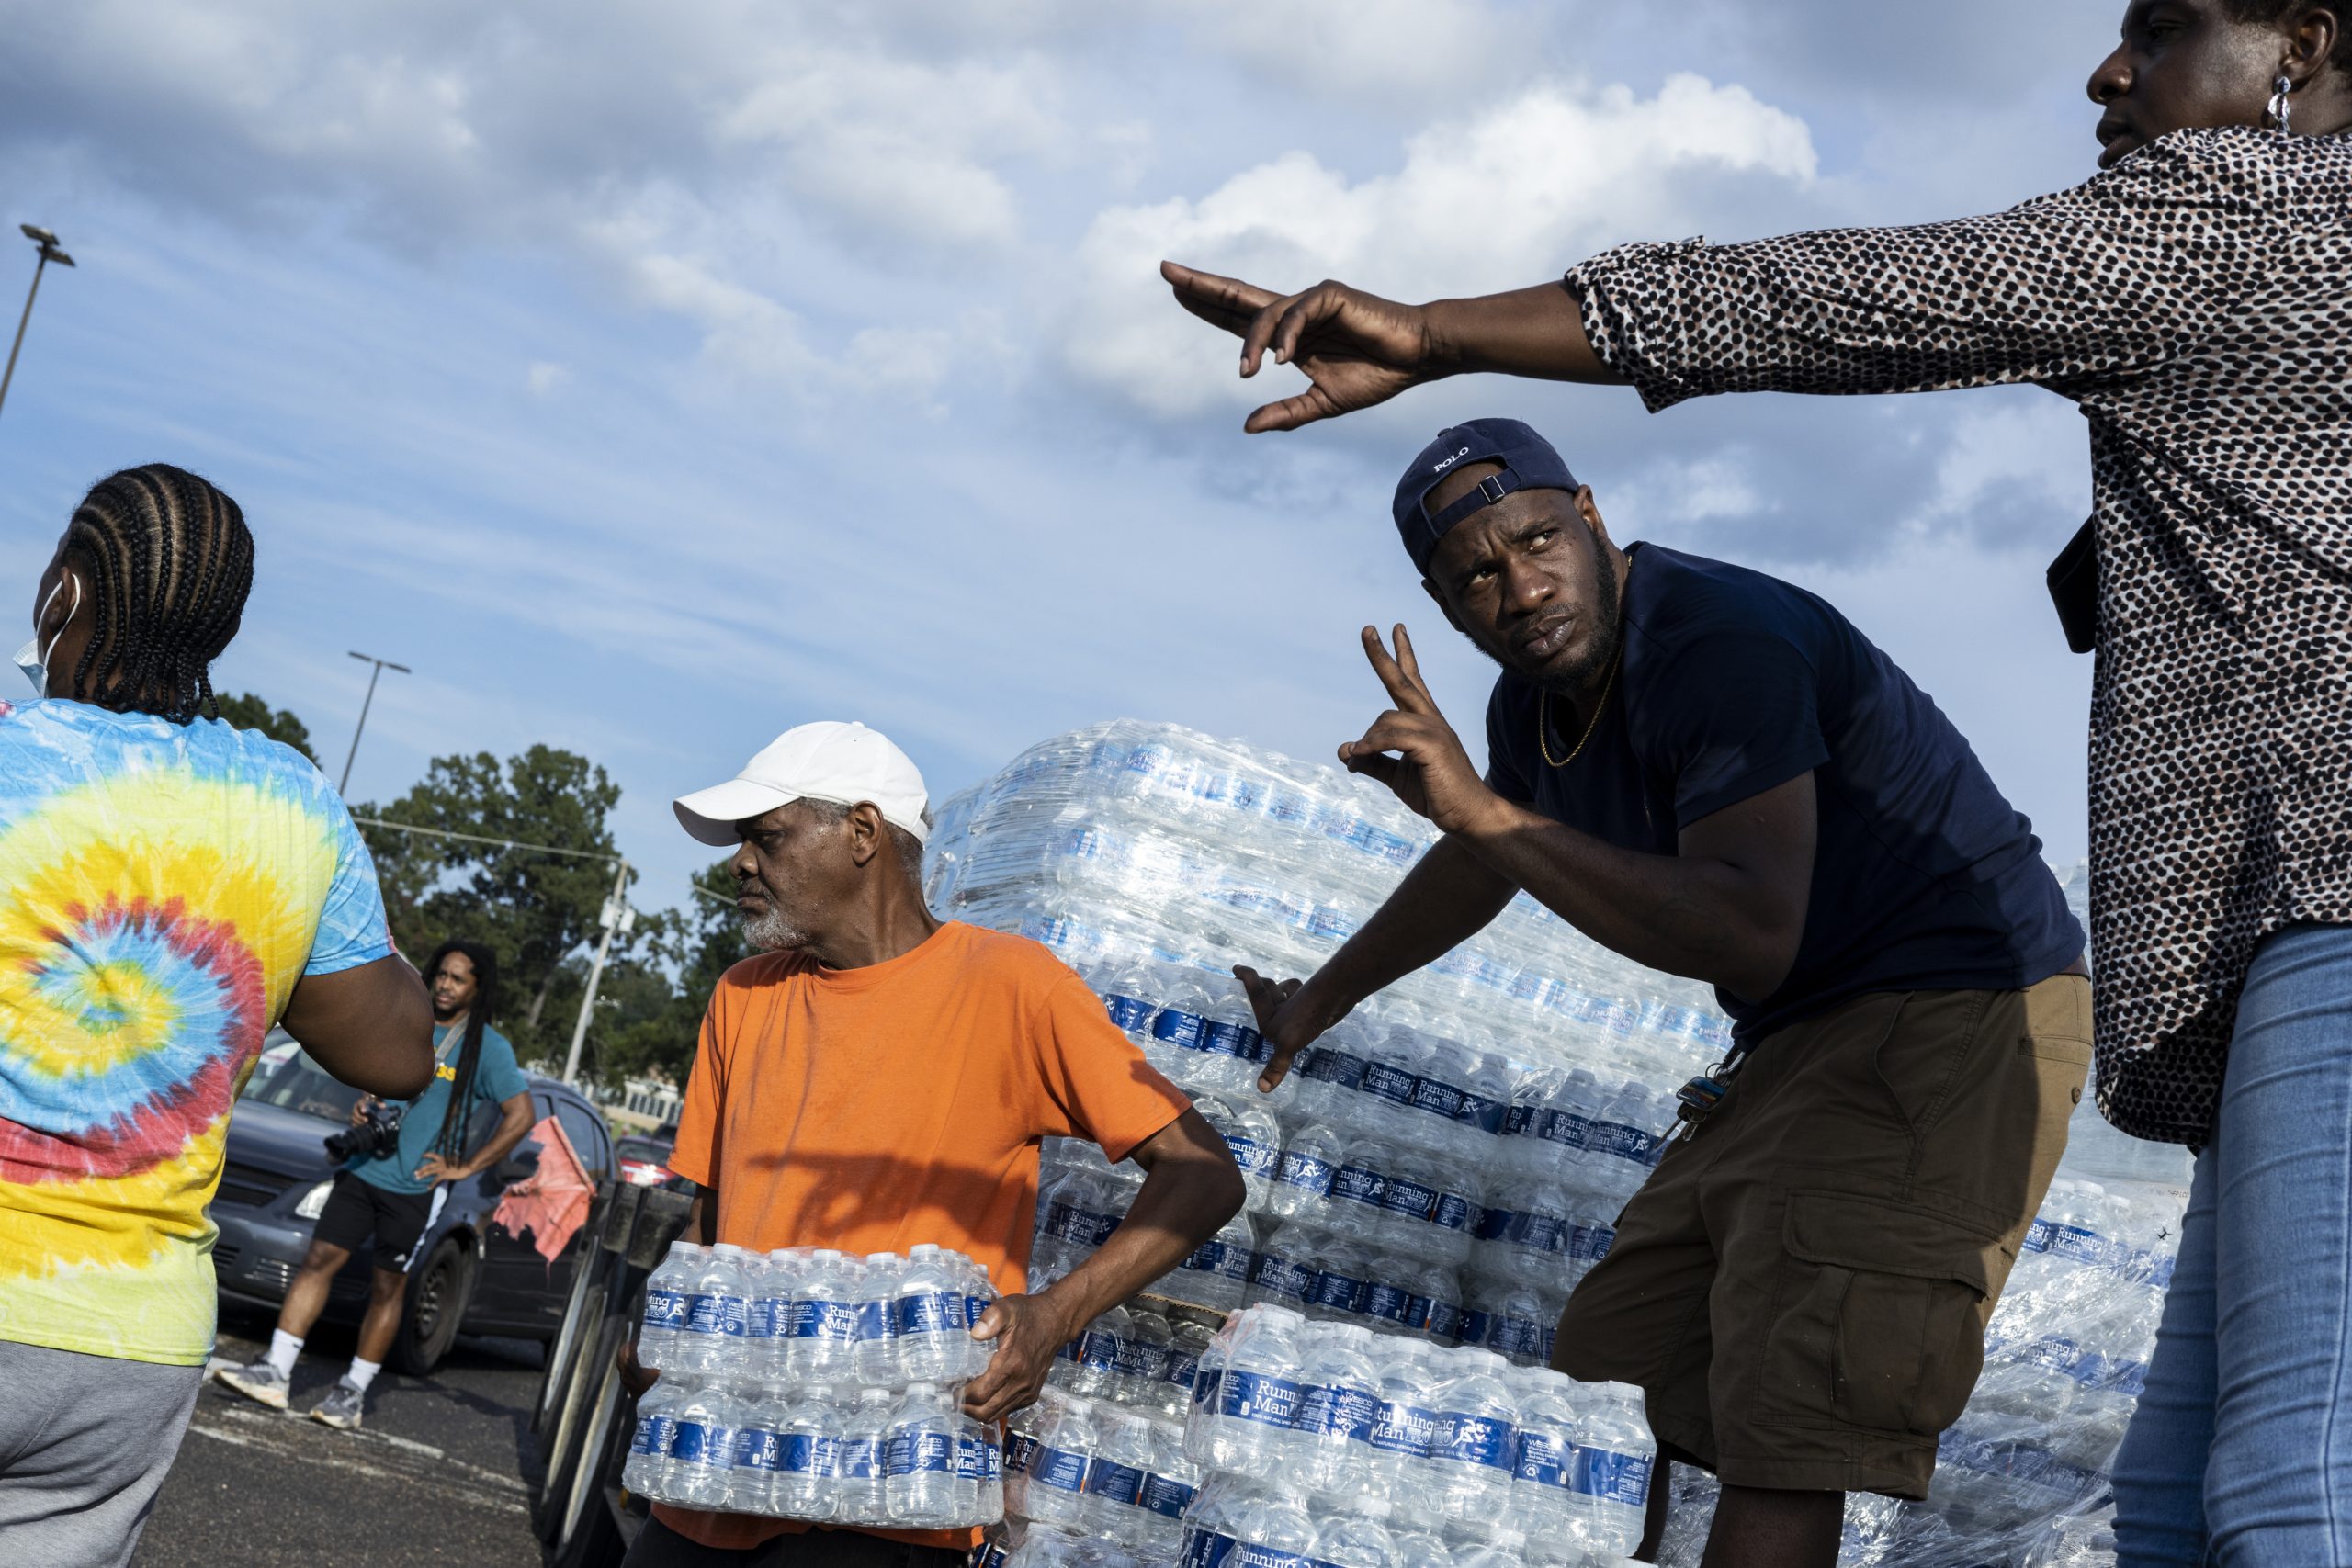 EPA opens civil right probe of Mississippi after Jackson water crisis